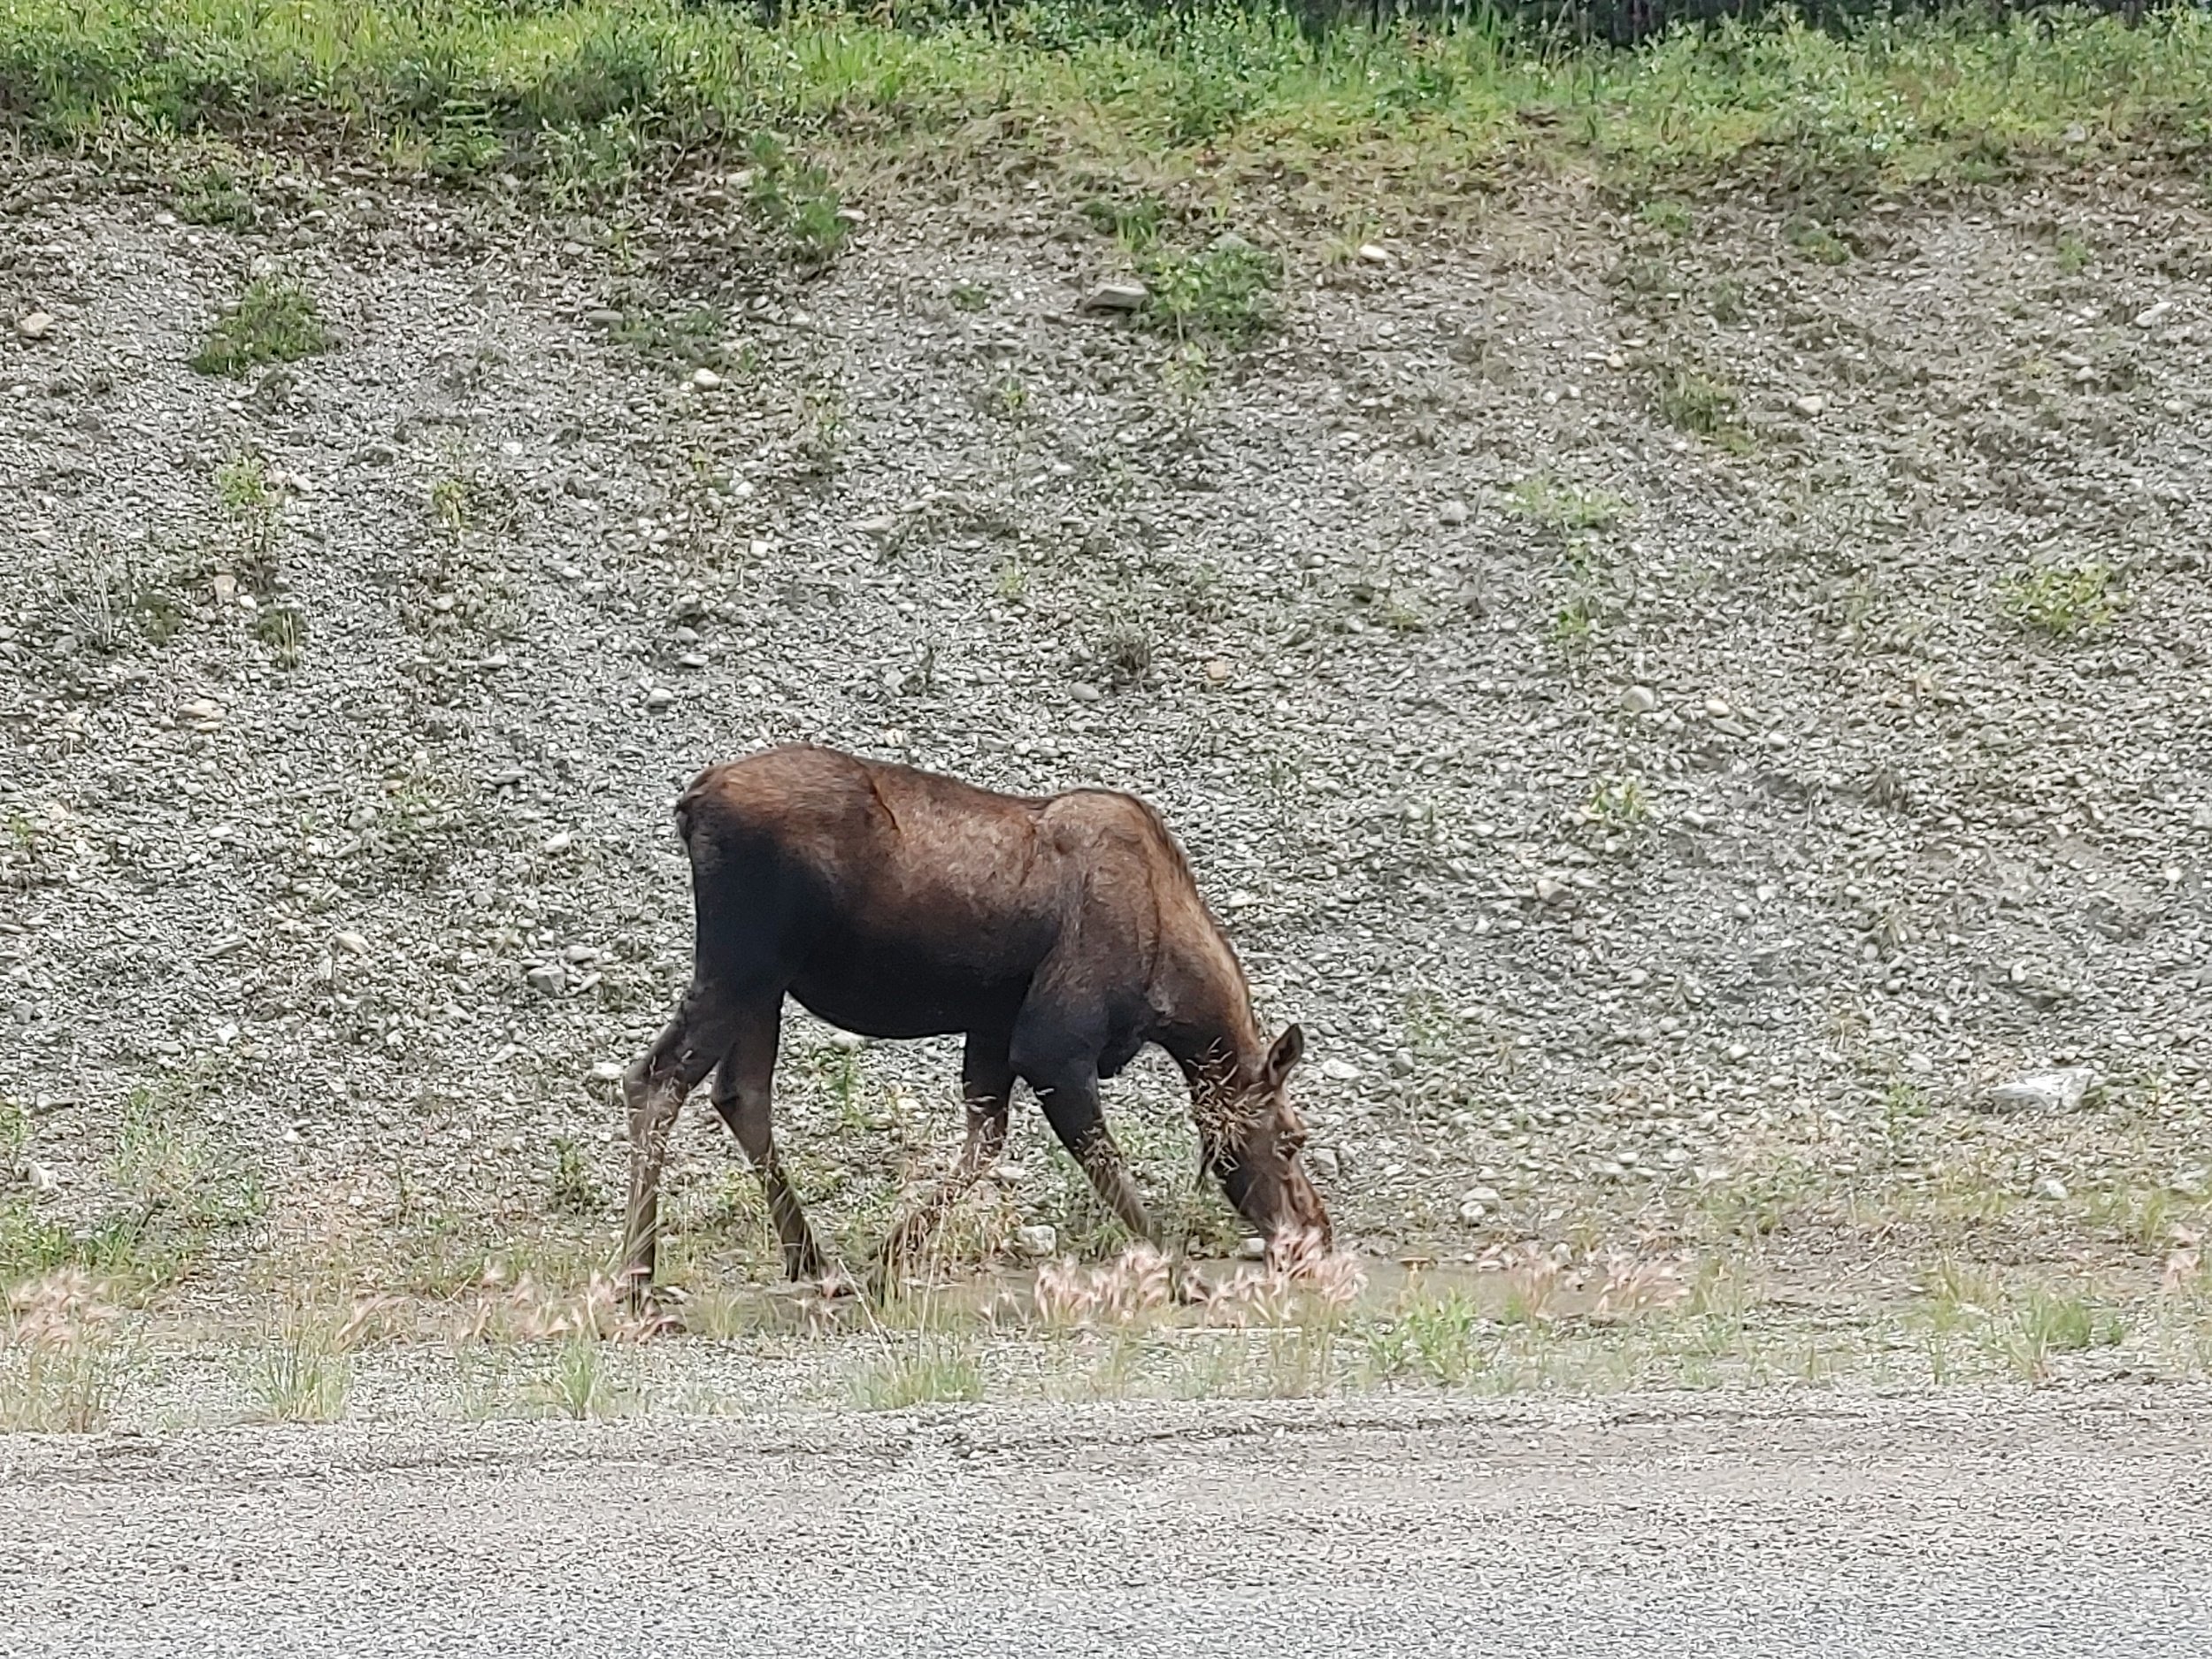  Large female moose up on the left. I pulled up next to her and listened to her drink. Yes, listened. Absolutely amazing. Good cadence of inhale and swallow.    Eventually she got tired of the traffic and walked into the forest.  